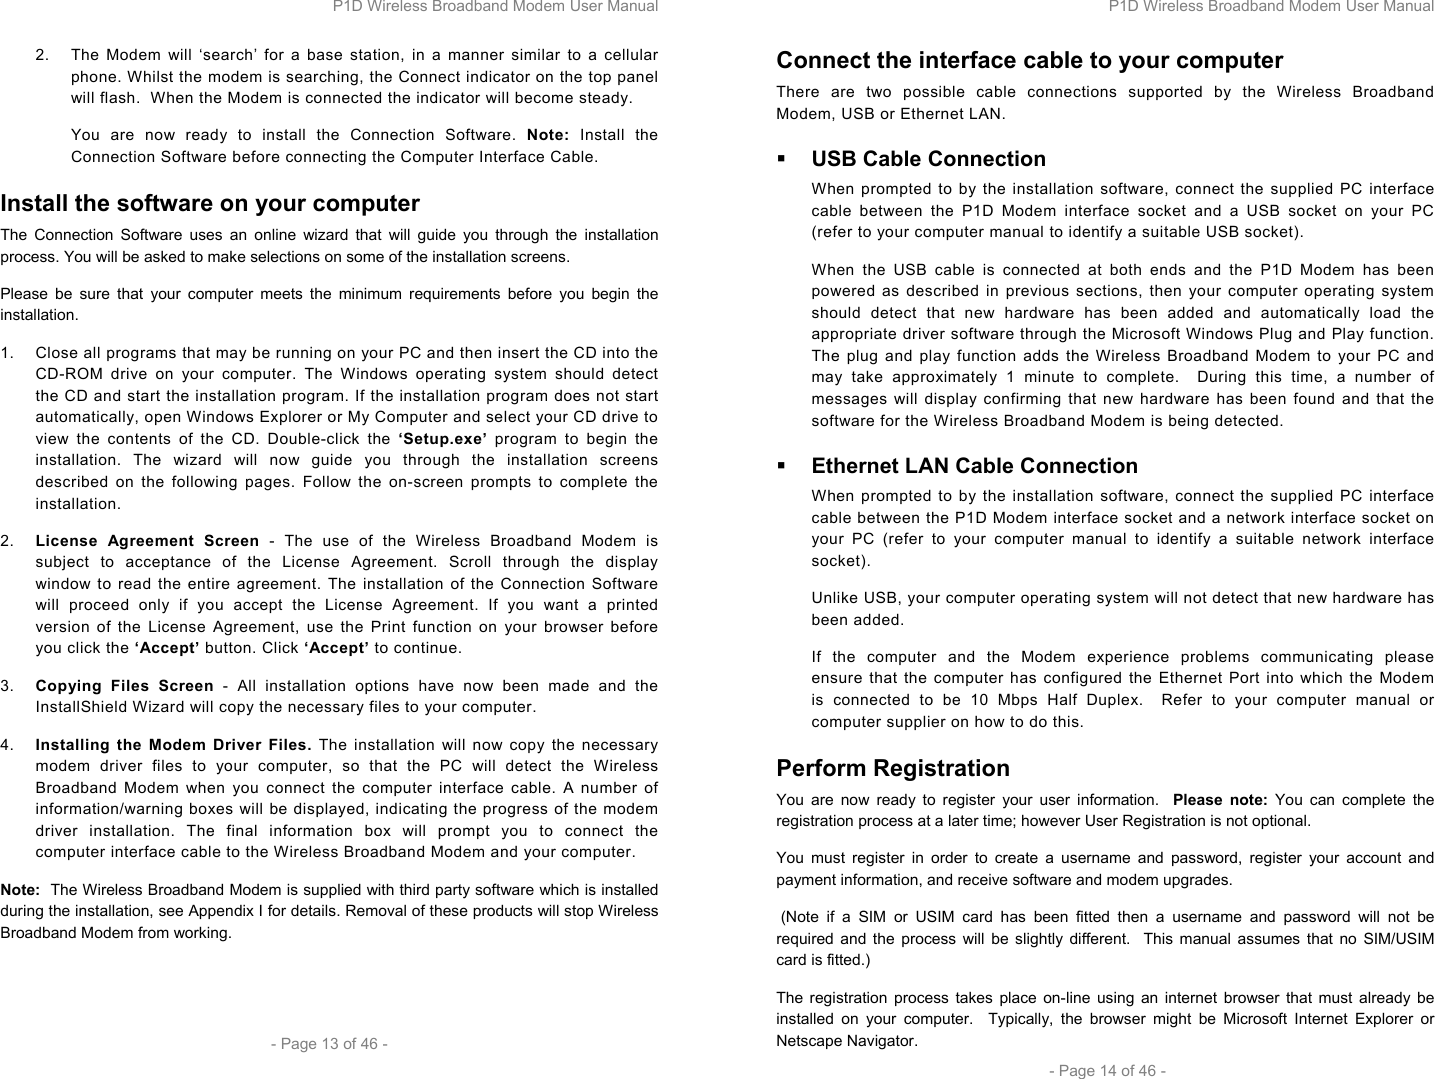 P1D Wireless Broadband Modem User Manual  - Page 13 of 46 -  2.  The Modem will ‘search’ for a base station, in a manner similar to a cellular phone. Whilst the modem is searching, the Connect indicator on the top panel will flash.  When the Modem is connected the indicator will become steady. You are now ready to install the Connection Software. Note: Install the Connection Software before connecting the Computer Interface Cable.  Install the software on your computer The Connection Software uses an online wizard that will guide you through the installation process. You will be asked to make selections on some of the installation screens.  Please be sure that your computer meets the minimum requirements before you begin the installation.  1.  Close all programs that may be running on your PC and then insert the CD into the CD-ROM drive on your computer. The Windows operating system should detect the CD and start the installation program. If the installation program does not start automatically, open Windows Explorer or My Computer and select your CD drive to view the contents of the CD. Double-click the ‘Setup.exe’  program to begin the installation. The wizard will now guide you through the installation screens described on the following pages. Follow the on-screen prompts to complete the installation.  2.  License Agreement Screen - The use of the Wireless Broadband Modem is subject to acceptance of the License Agreement. Scroll through the display window to read the entire agreement. The installation of the Connection Software will proceed only if you accept the License Agreement. If you want a printed version of the License Agreement, use the Print function on your browser before you click the ‘Accept’ button. Click ‘Accept’ to continue. 3.  Copying Files Screen - All installation options have now been made and the InstallShield Wizard will copy the necessary files to your computer. 4.  Installing the Modem Driver Files. The installation will now copy the necessary modem driver files to your computer, so that the PC will detect the Wireless Broadband Modem when you connect the computer interface cable. A number of information/warning boxes will be displayed, indicating the progress of the modem driver installation. The final information box will prompt you to connect the computer interface cable to the Wireless Broadband Modem and your computer. Note:  The Wireless Broadband Modem is supplied with third party software which is installed during the installation, see Appendix I for details. Removal of these products will stop Wireless Broadband Modem from working.  P1D Wireless Broadband Modem User Manual  - Page 14 of 46 - Connect the interface cable to your computer There are two possible cable connections supported by the Wireless Broadband Modem, USB or Ethernet LAN.  USB Cable Connection When prompted to by the installation software, connect the supplied PC interface cable between the P1D Modem interface socket and a USB socket on your PC (refer to your computer manual to identify a suitable USB socket). When the USB cable is connected at both ends and the P1D Modem has been powered as described in previous sections, then your computer operating system should detect that new hardware has been added and automatically load the appropriate driver software through the Microsoft Windows Plug and Play function. The plug and play function adds the Wireless Broadband Modem to your PC and may take approximately 1 minute to complete.  During this time, a number of messages will display confirming that new hardware has been found and that the software for the Wireless Broadband Modem is being detected.  Ethernet LAN Cable Connection When prompted to by the installation software, connect the supplied PC interface cable between the P1D Modem interface socket and a network interface socket on your PC (refer to your computer manual to identify a suitable network interface socket). Unlike USB, your computer operating system will not detect that new hardware has been added.  If the computer and the Modem experience problems communicating please ensure that the computer has configured the Ethernet Port into which the Modem is connected to be 10 Mbps Half Duplex.  Refer to your computer manual or computer supplier on how to do this. Perform Registration You are now ready to register your user information.  Please note: You can complete the registration process at a later time; however User Registration is not optional.  You must register in order to create a username and password, register your account and payment information, and receive software and modem upgrades.   (Note if a SIM or USIM card has been fitted then a username and password will not be required and the process will be slightly different.  This manual assumes that no SIM/USIM card is fitted.) The registration process takes place on-line using an internet browser that must already be installed on your computer.  Typically, the browser might be Microsoft Internet Explorer or Netscape Navigator. 